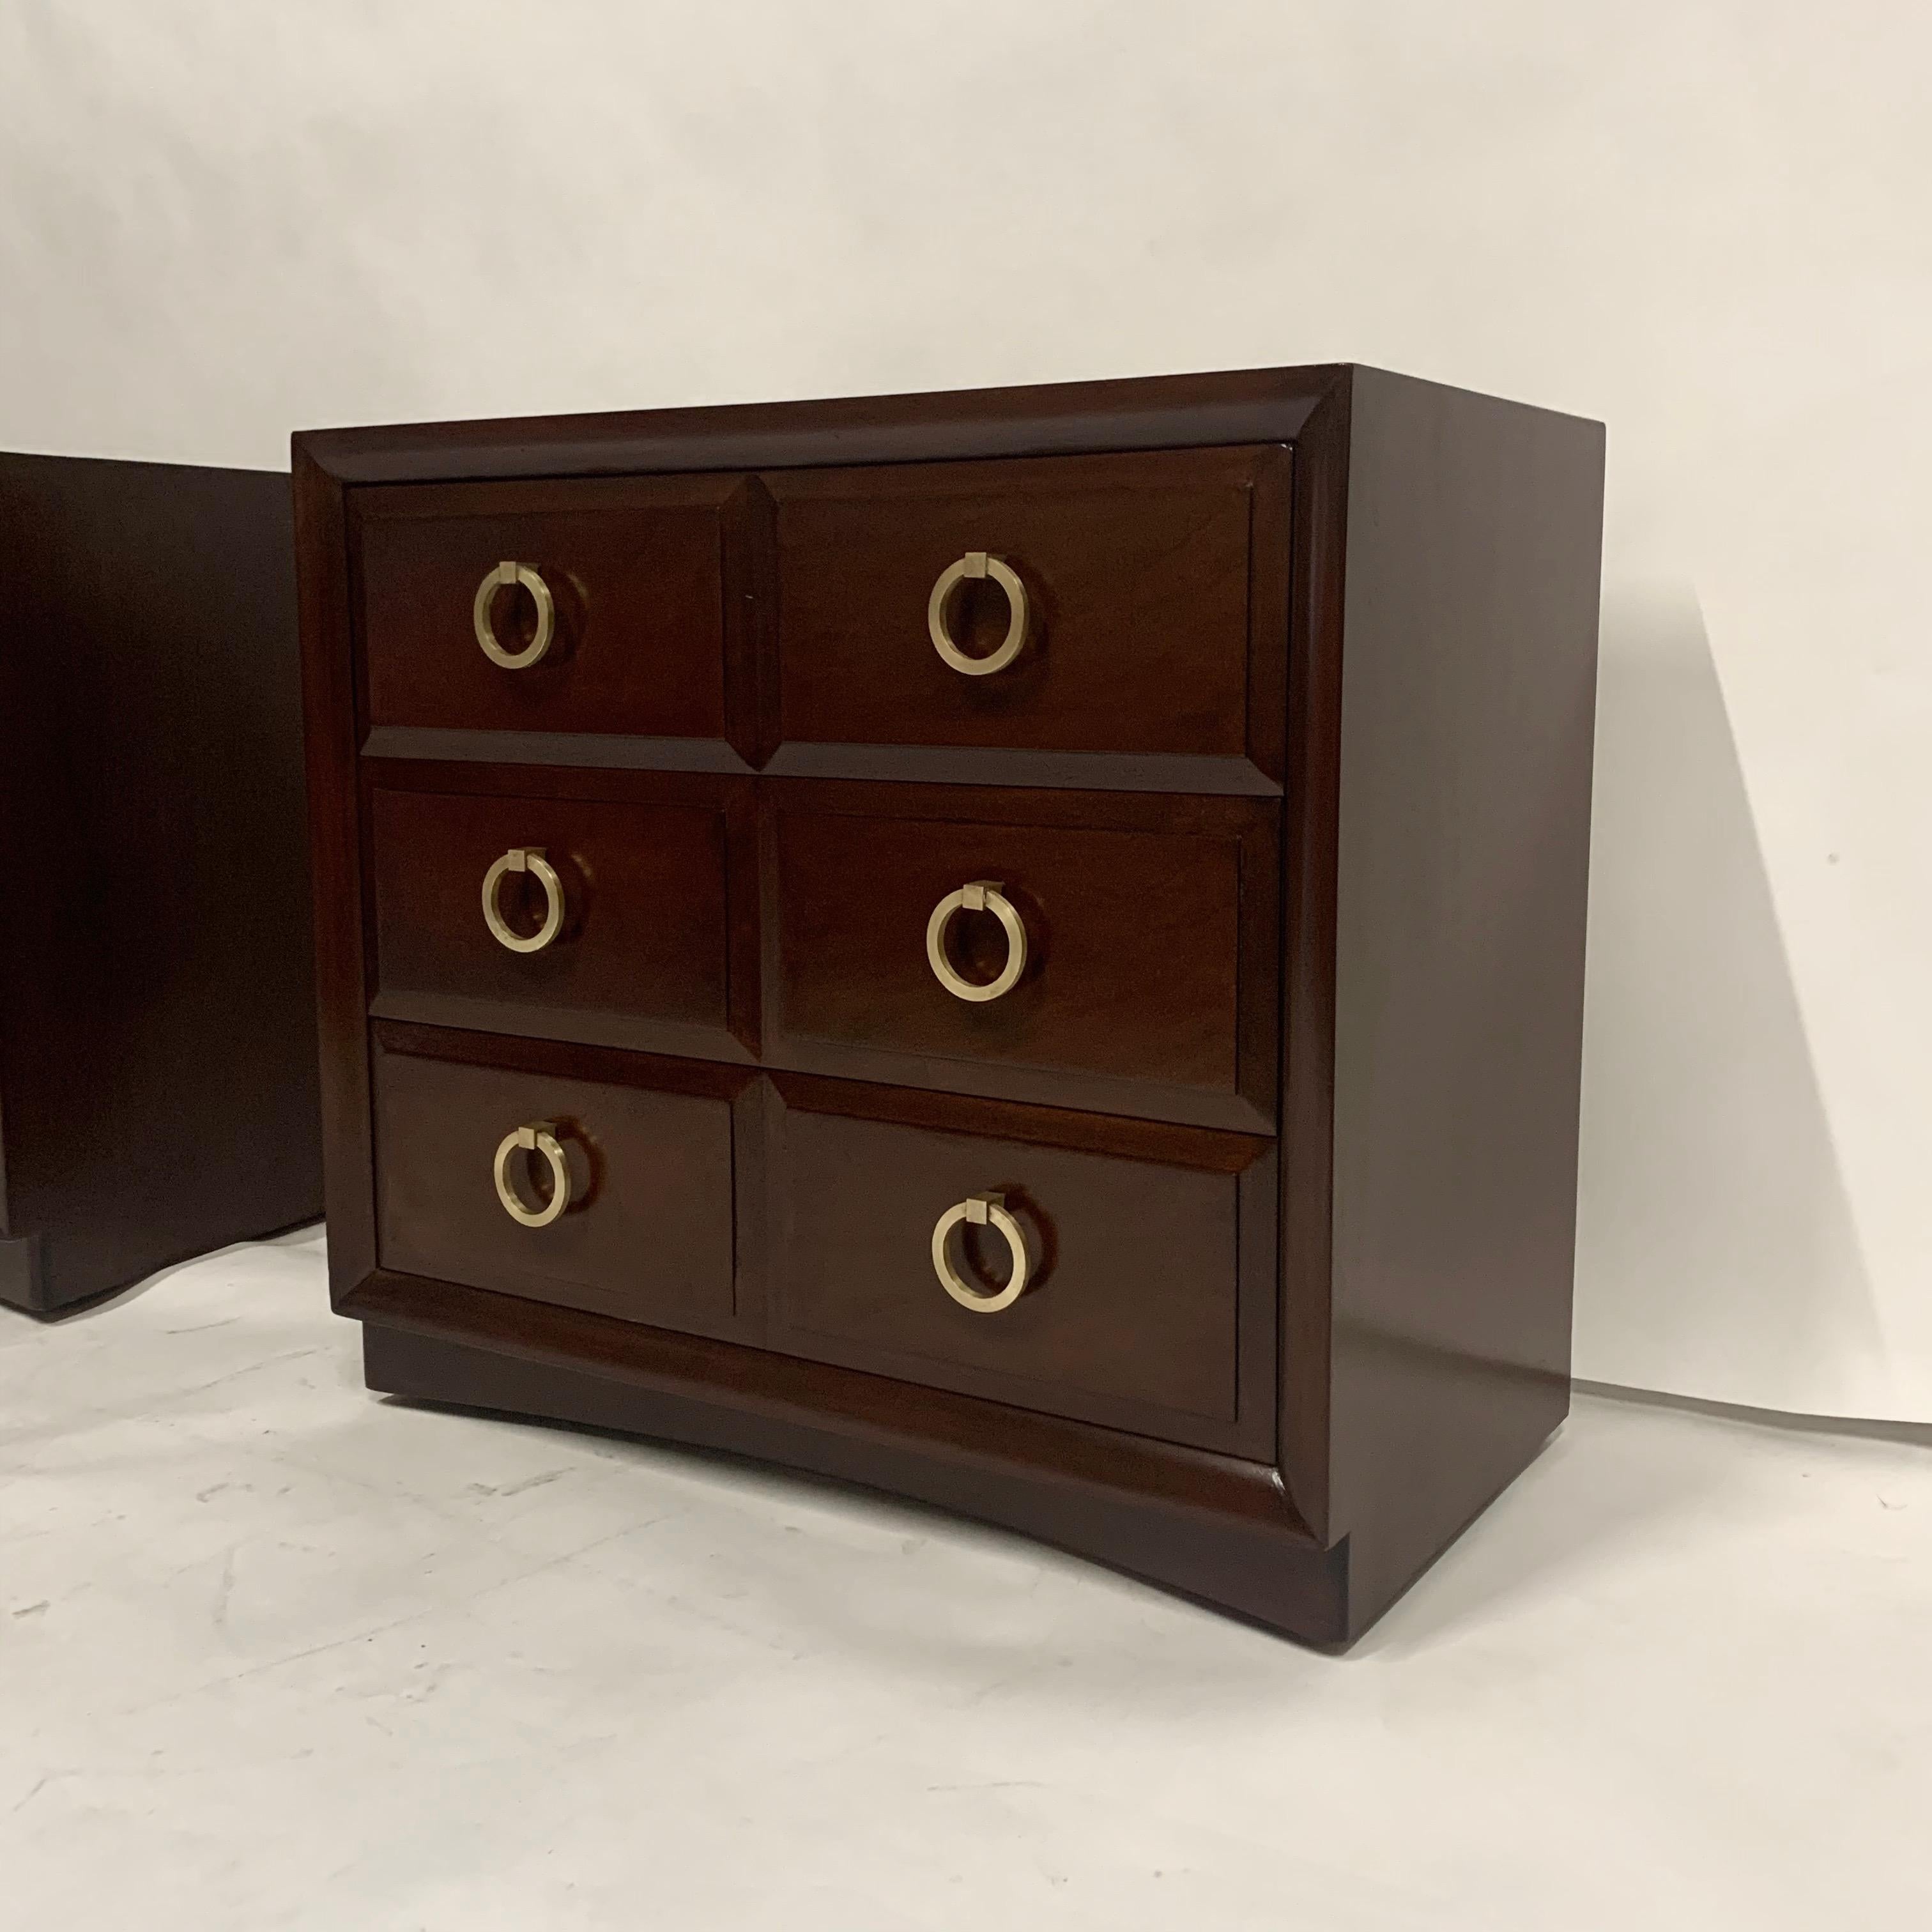 A very glamorous pair of three-drawer chests by Widdicomb and designed by T.H. Robsjohn Gibbings in the early 1950s. Expertly refinished in a deep mahogany lacquer and polished brass pulls. Scratch in original finish still shows through the refinish